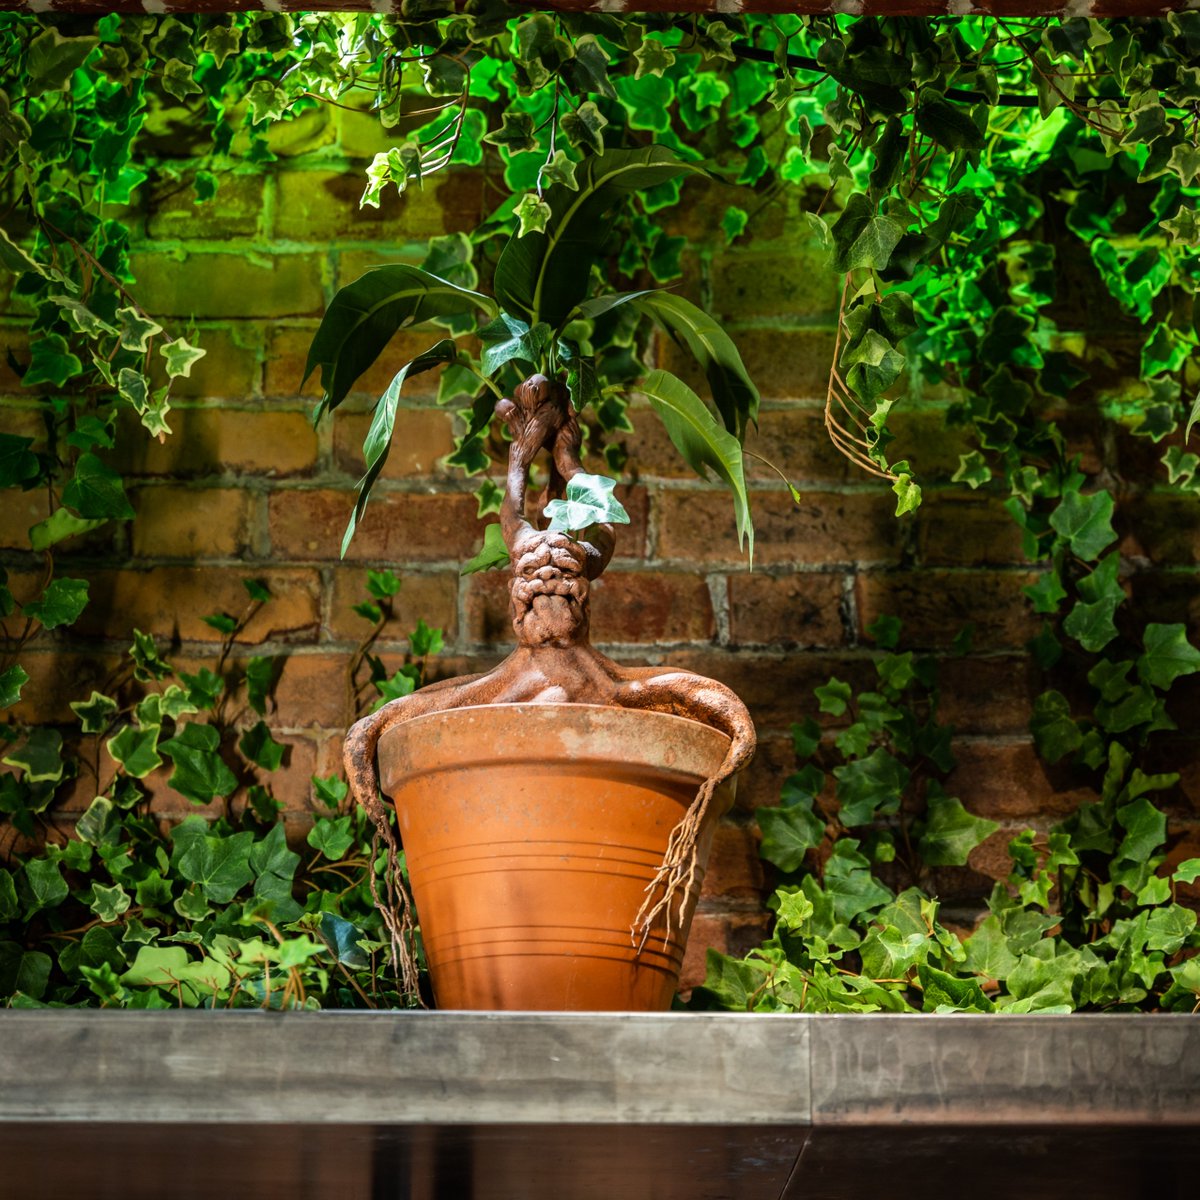 DO NOT forget your earmuffs when handling these melodious Mandrakes! Spot a few of these pesky plants in the Toys & Games room at #HarryPotterNY 🎧 #EarmuffDay